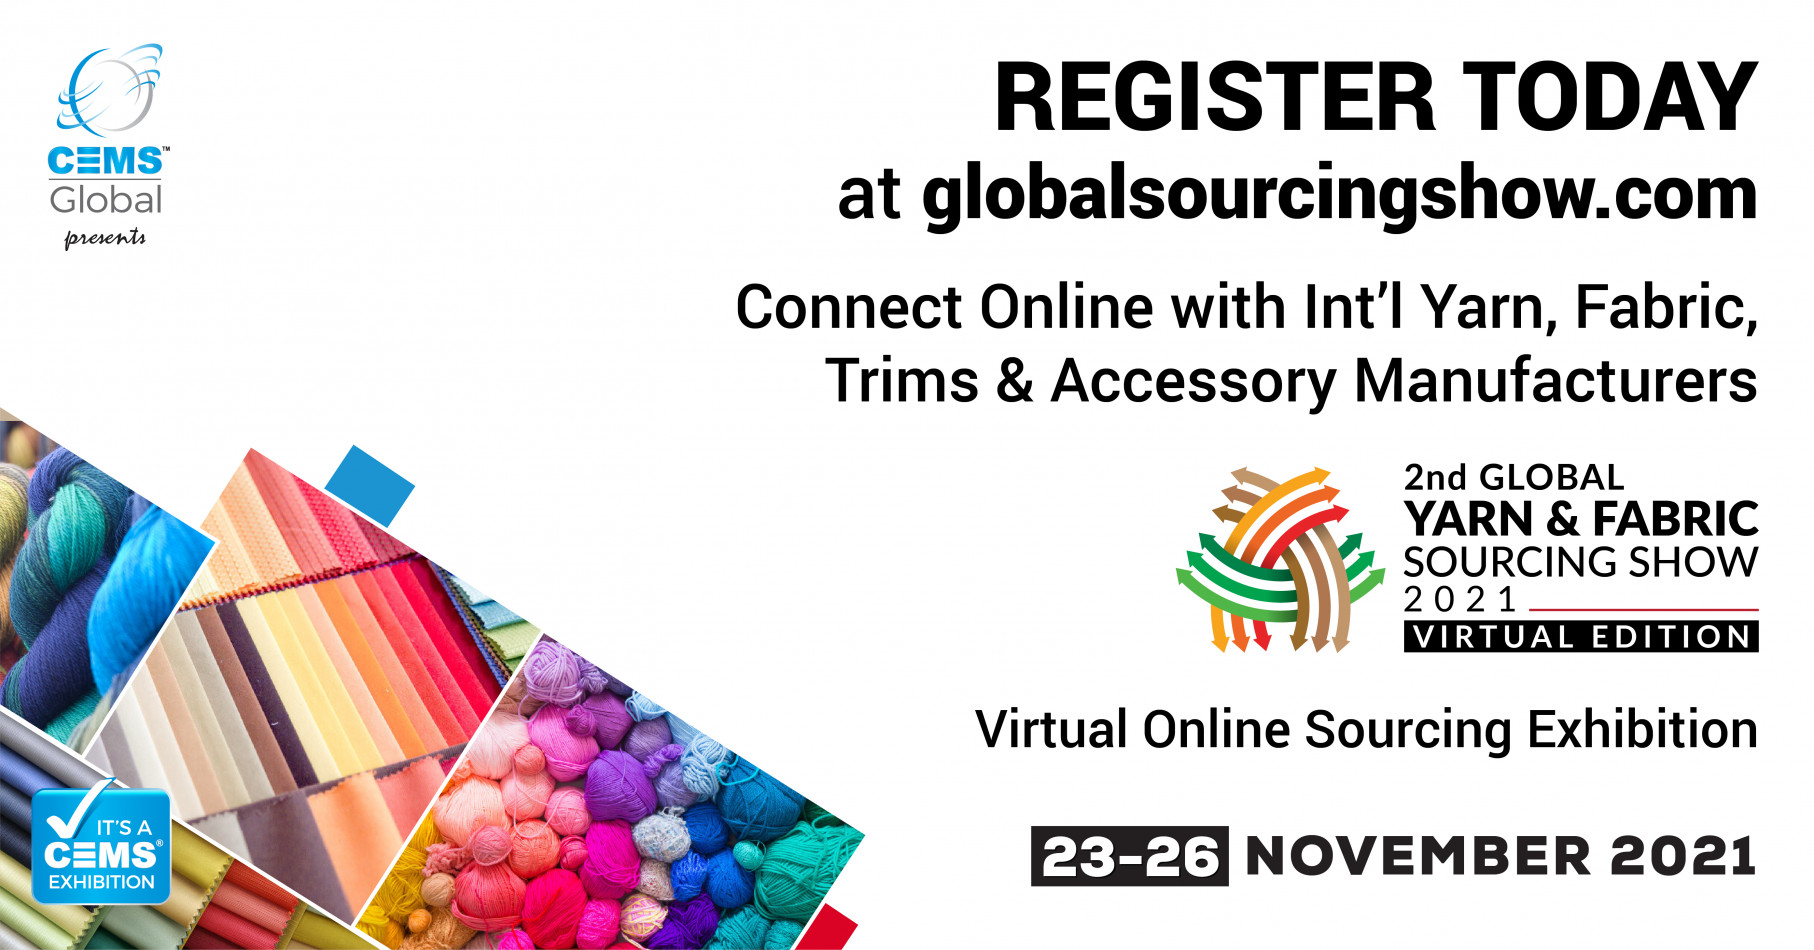 CEMS-Global USA’s 2nd Global Sourcing Show Virtual Edition for the Textiles & Apparel Sector pulls in over 2,000 buyers from 29 Countries